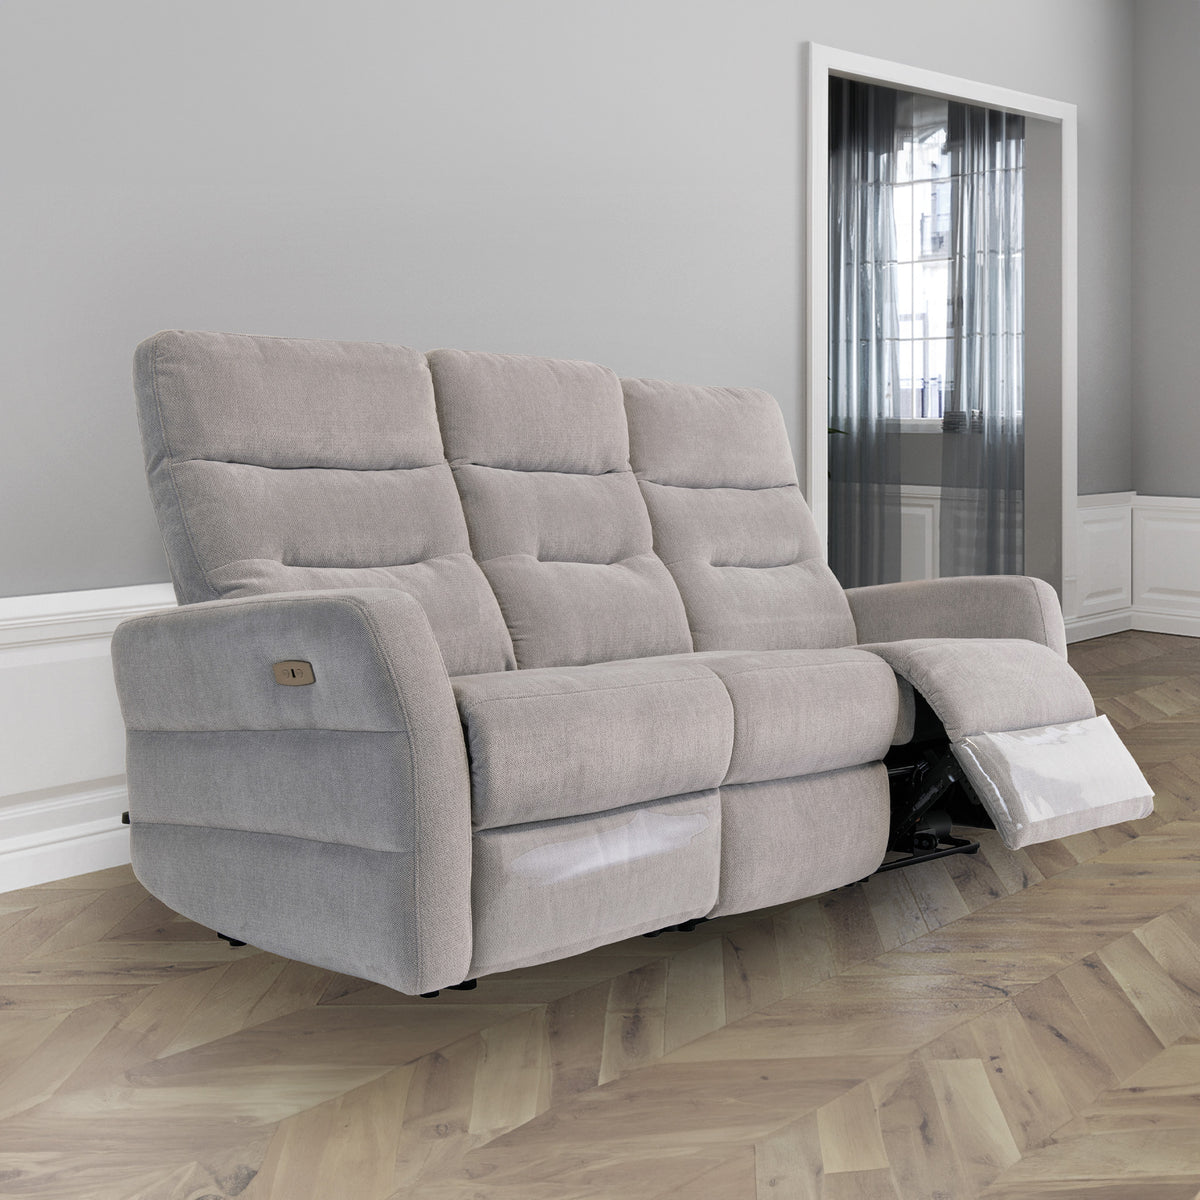 Dalton Silver Grey Fabric Electric Reclining 3 Seater Sofa for living room